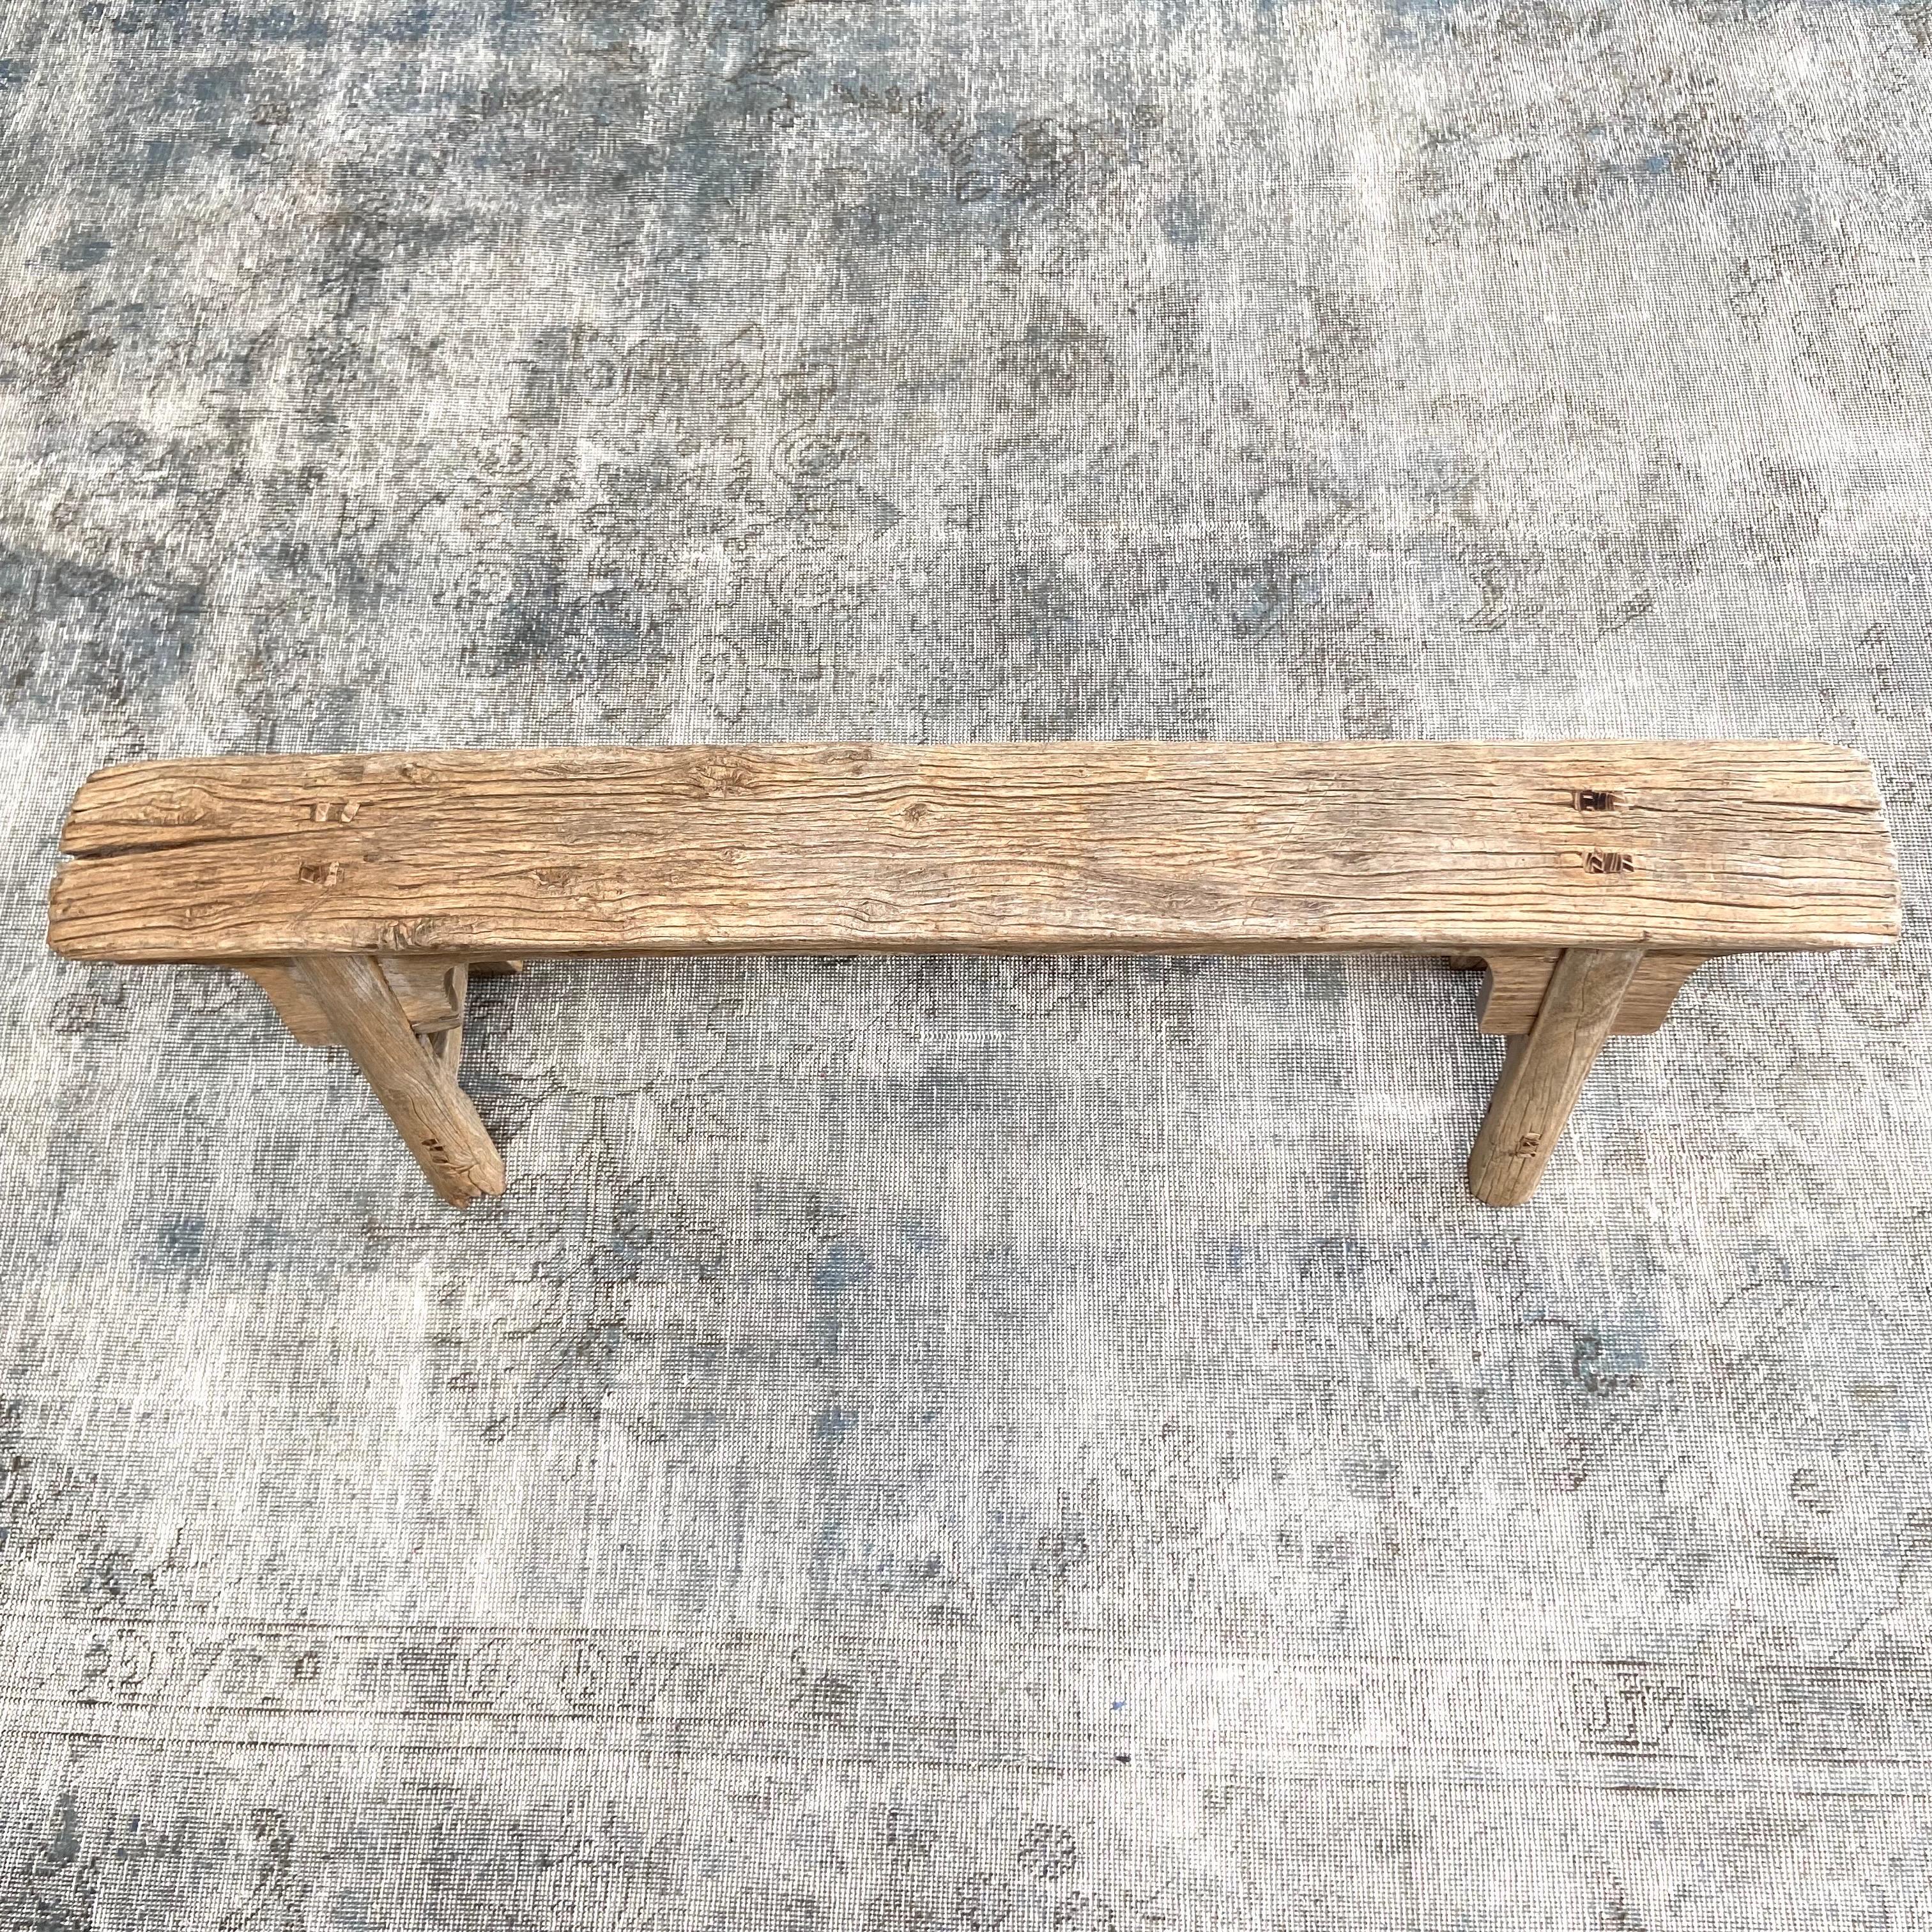 Vintage Antique Elm Wood Bench
These are the real vintage antique elm wood benches! Beautiful antique patina, with weathering and age, these are solid and sturdy ready for daily use, use as as a table behind a sofa, stool, coffee table, they are